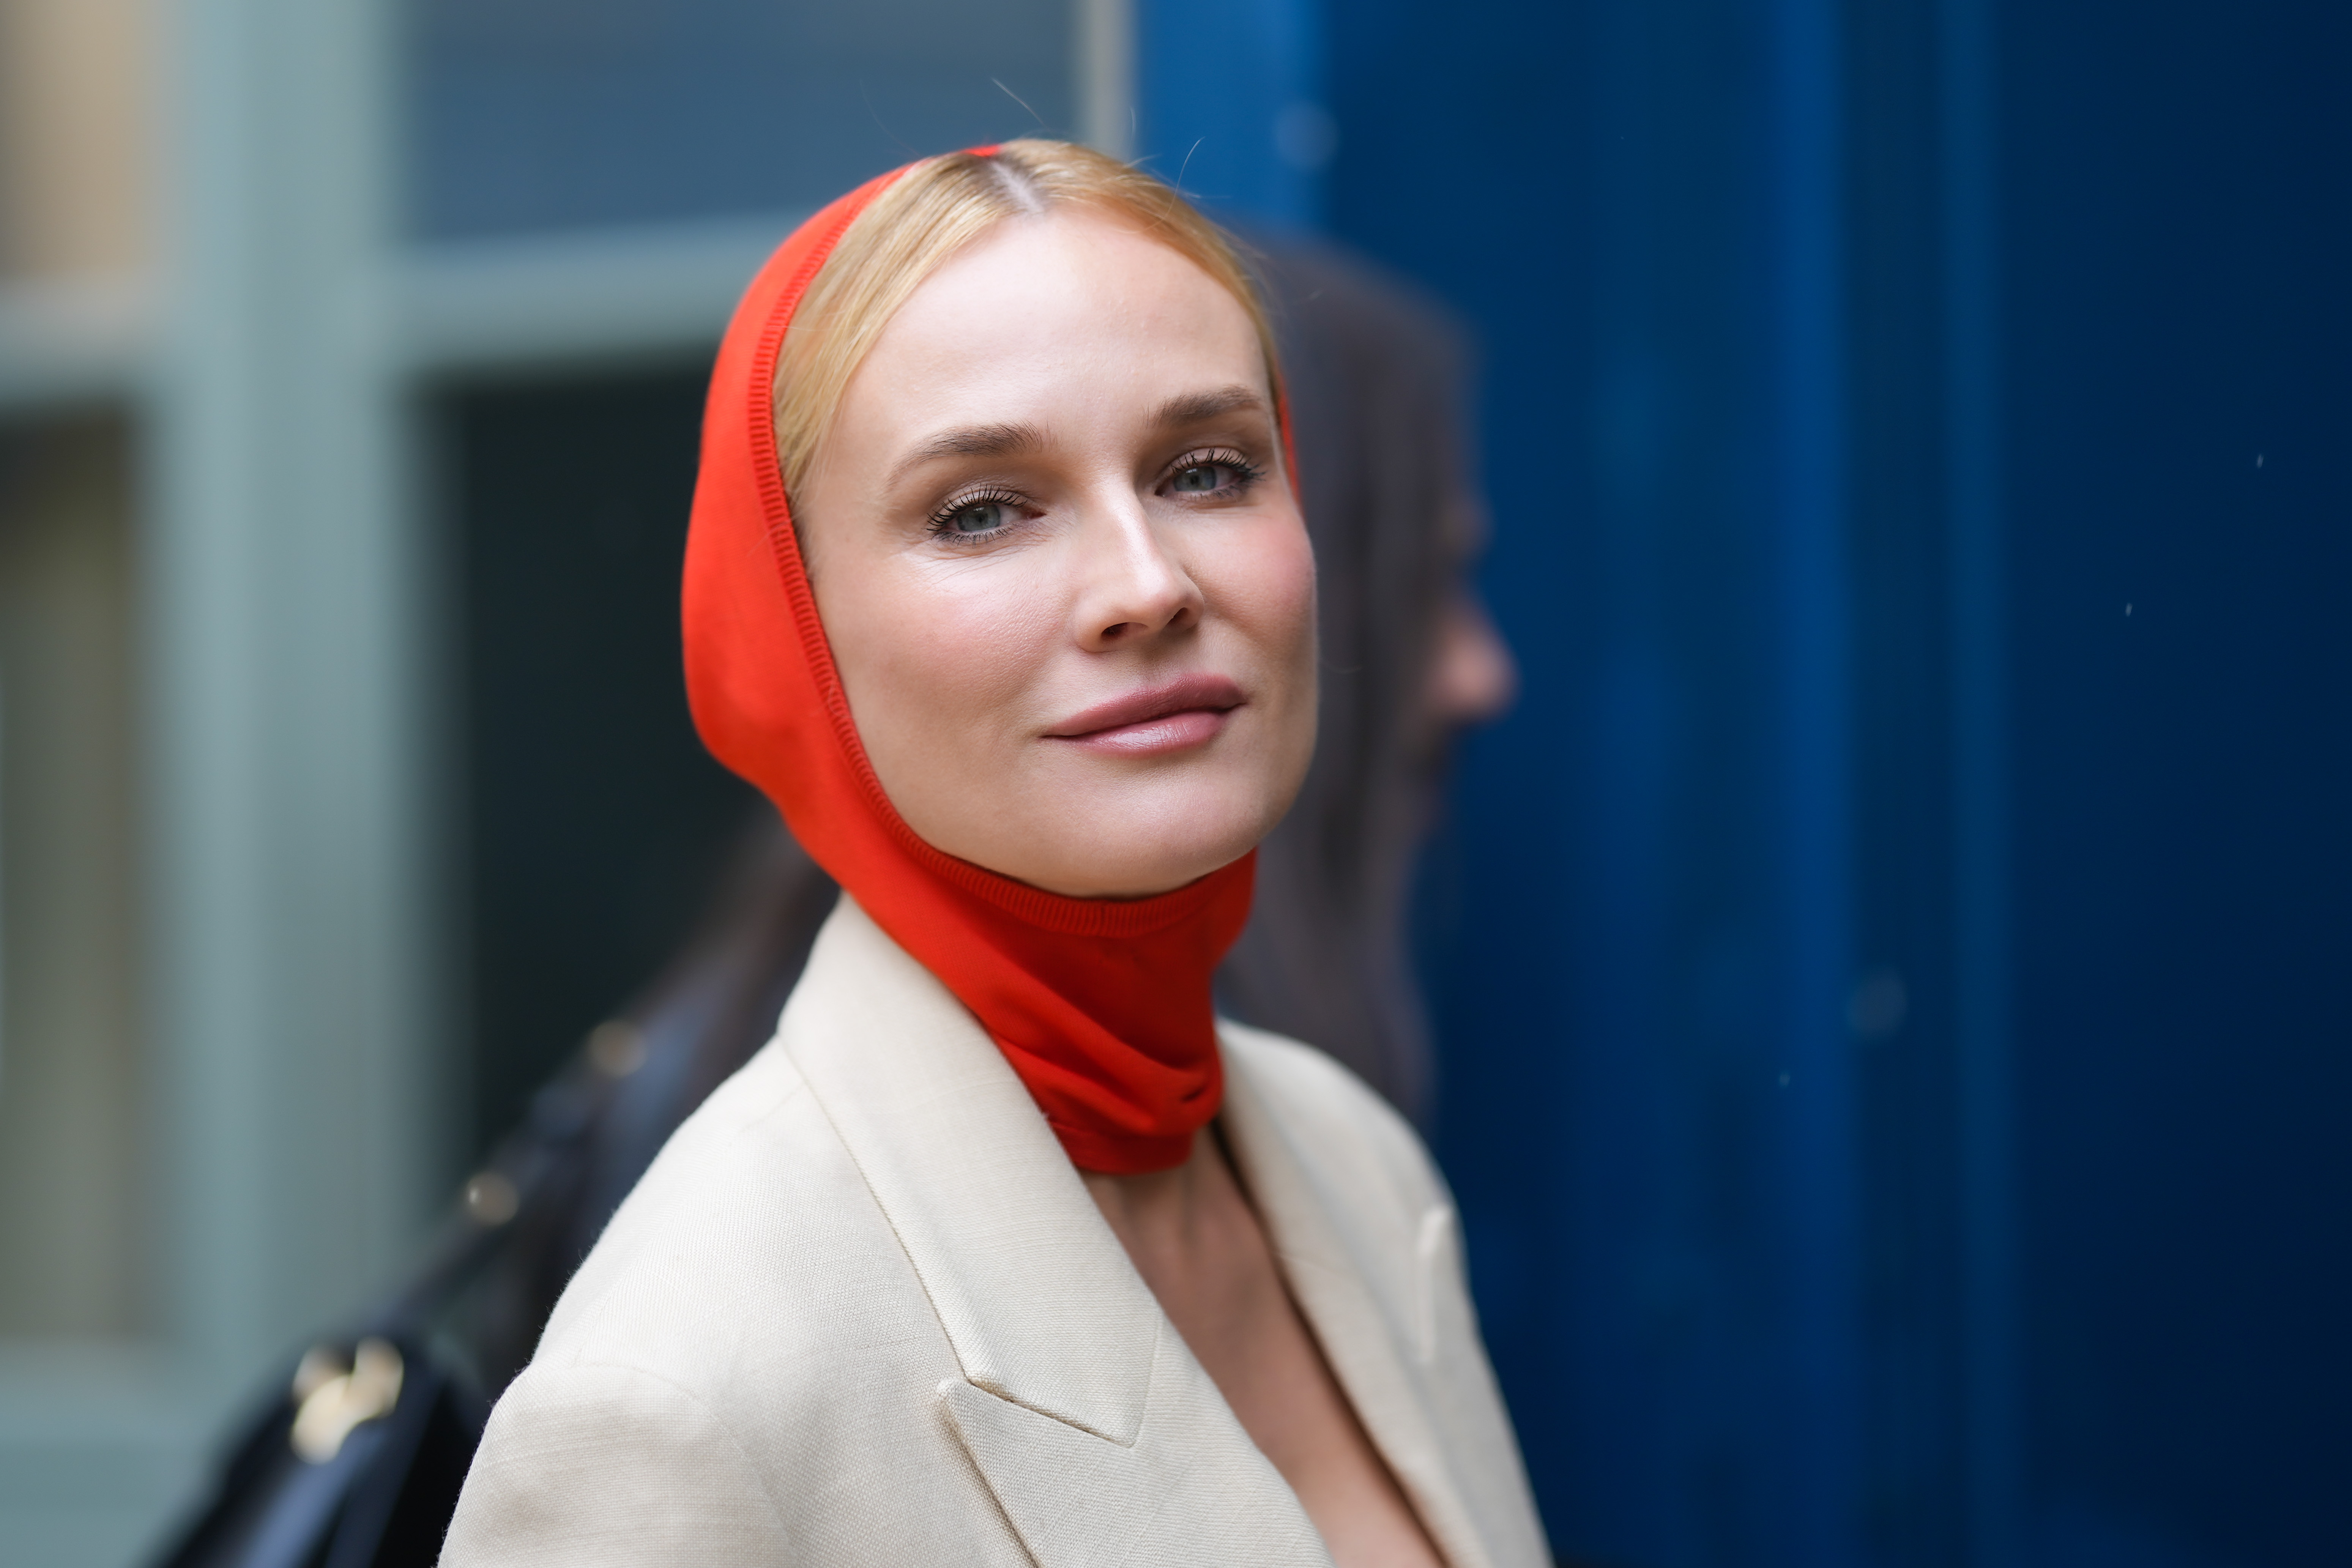 Diane Kruger Will Play 3 Roles in David Cronenberg's The Shrouds